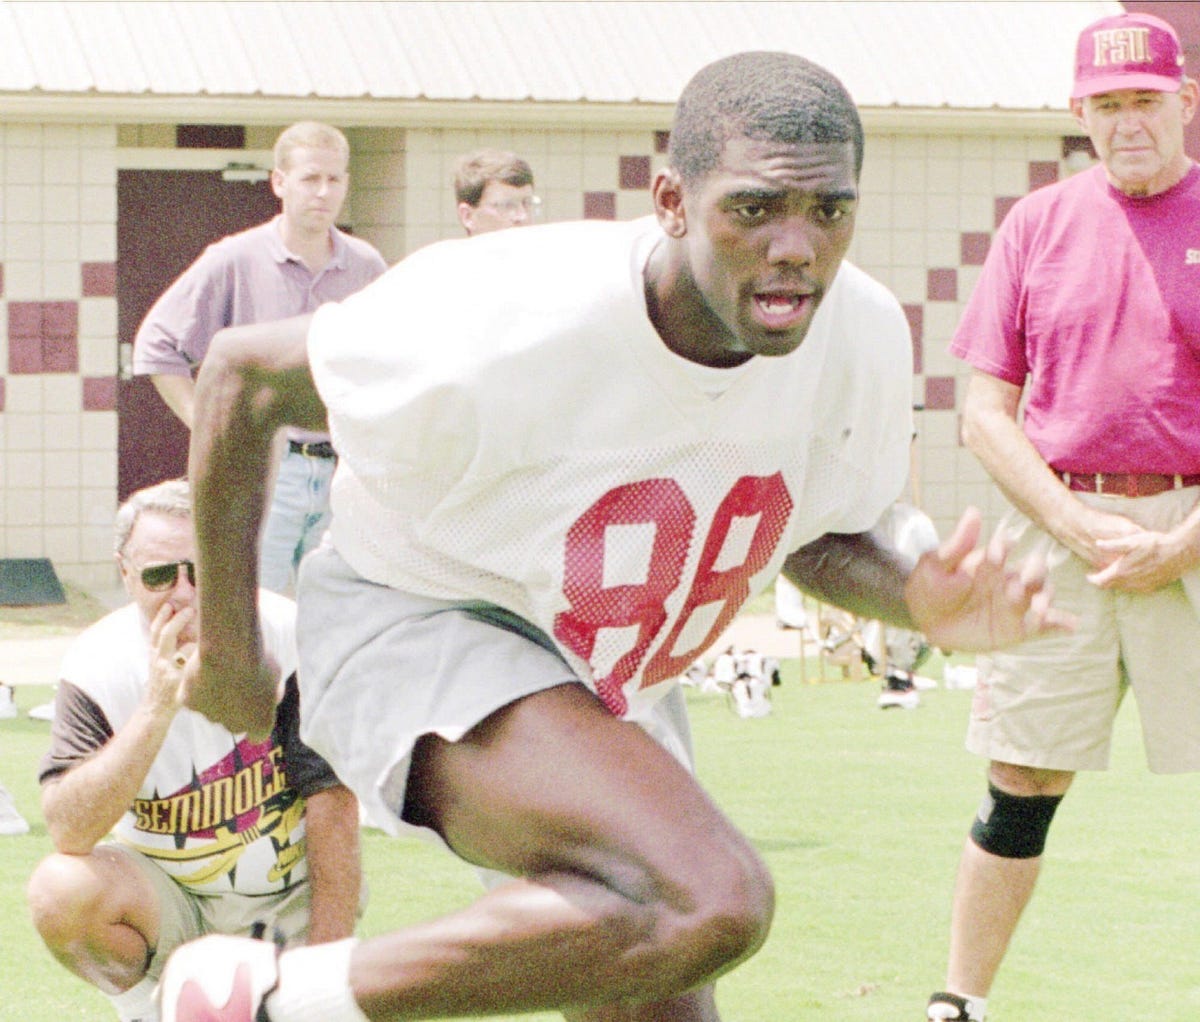 @On3sports Randy Moss not getting booted from Fsu with Peter Warrick coming in